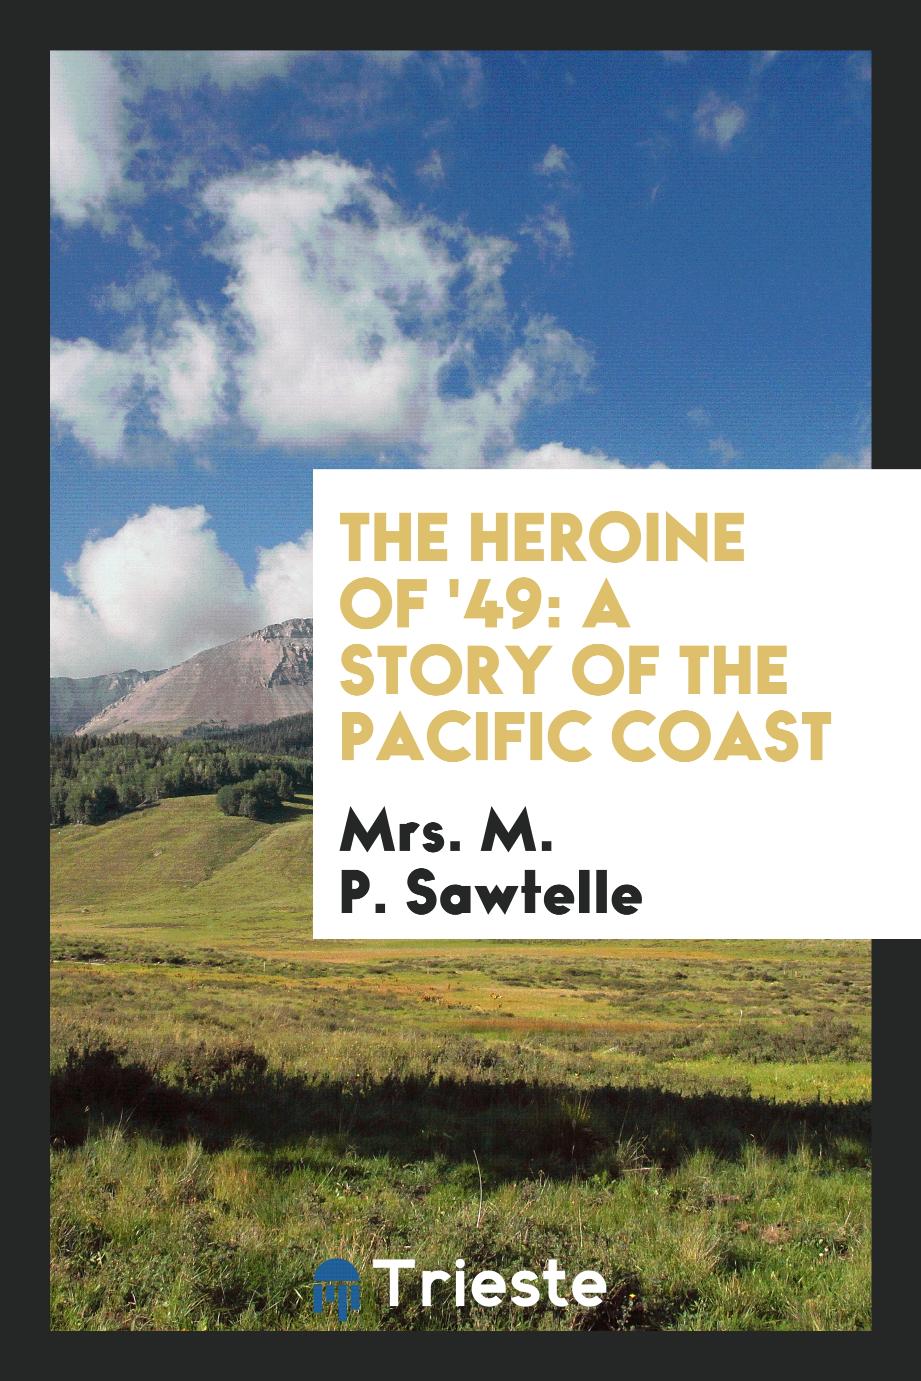 The heroine of '49: a story of the Pacific Coast